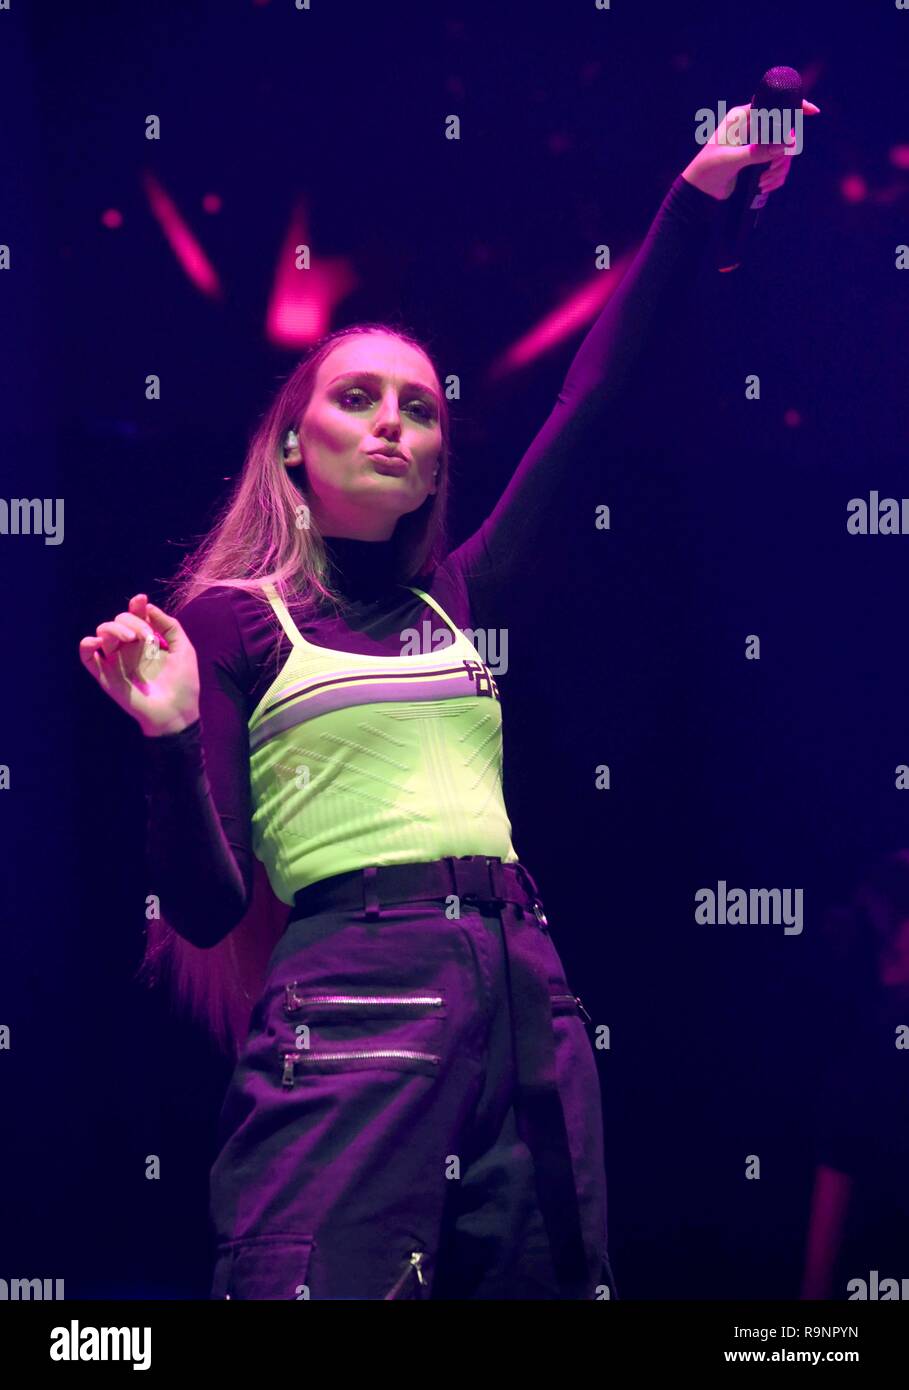 Acts performing at Hits Radio Live 2018 at Manchester Arena, Manchester, UK  on 25th November 2018 Featuring: Little Mix, Perrie Edwards Where:  Manchester, United Kingdom When: 25 Nov 2018 Credit: Graham Finney/WENN